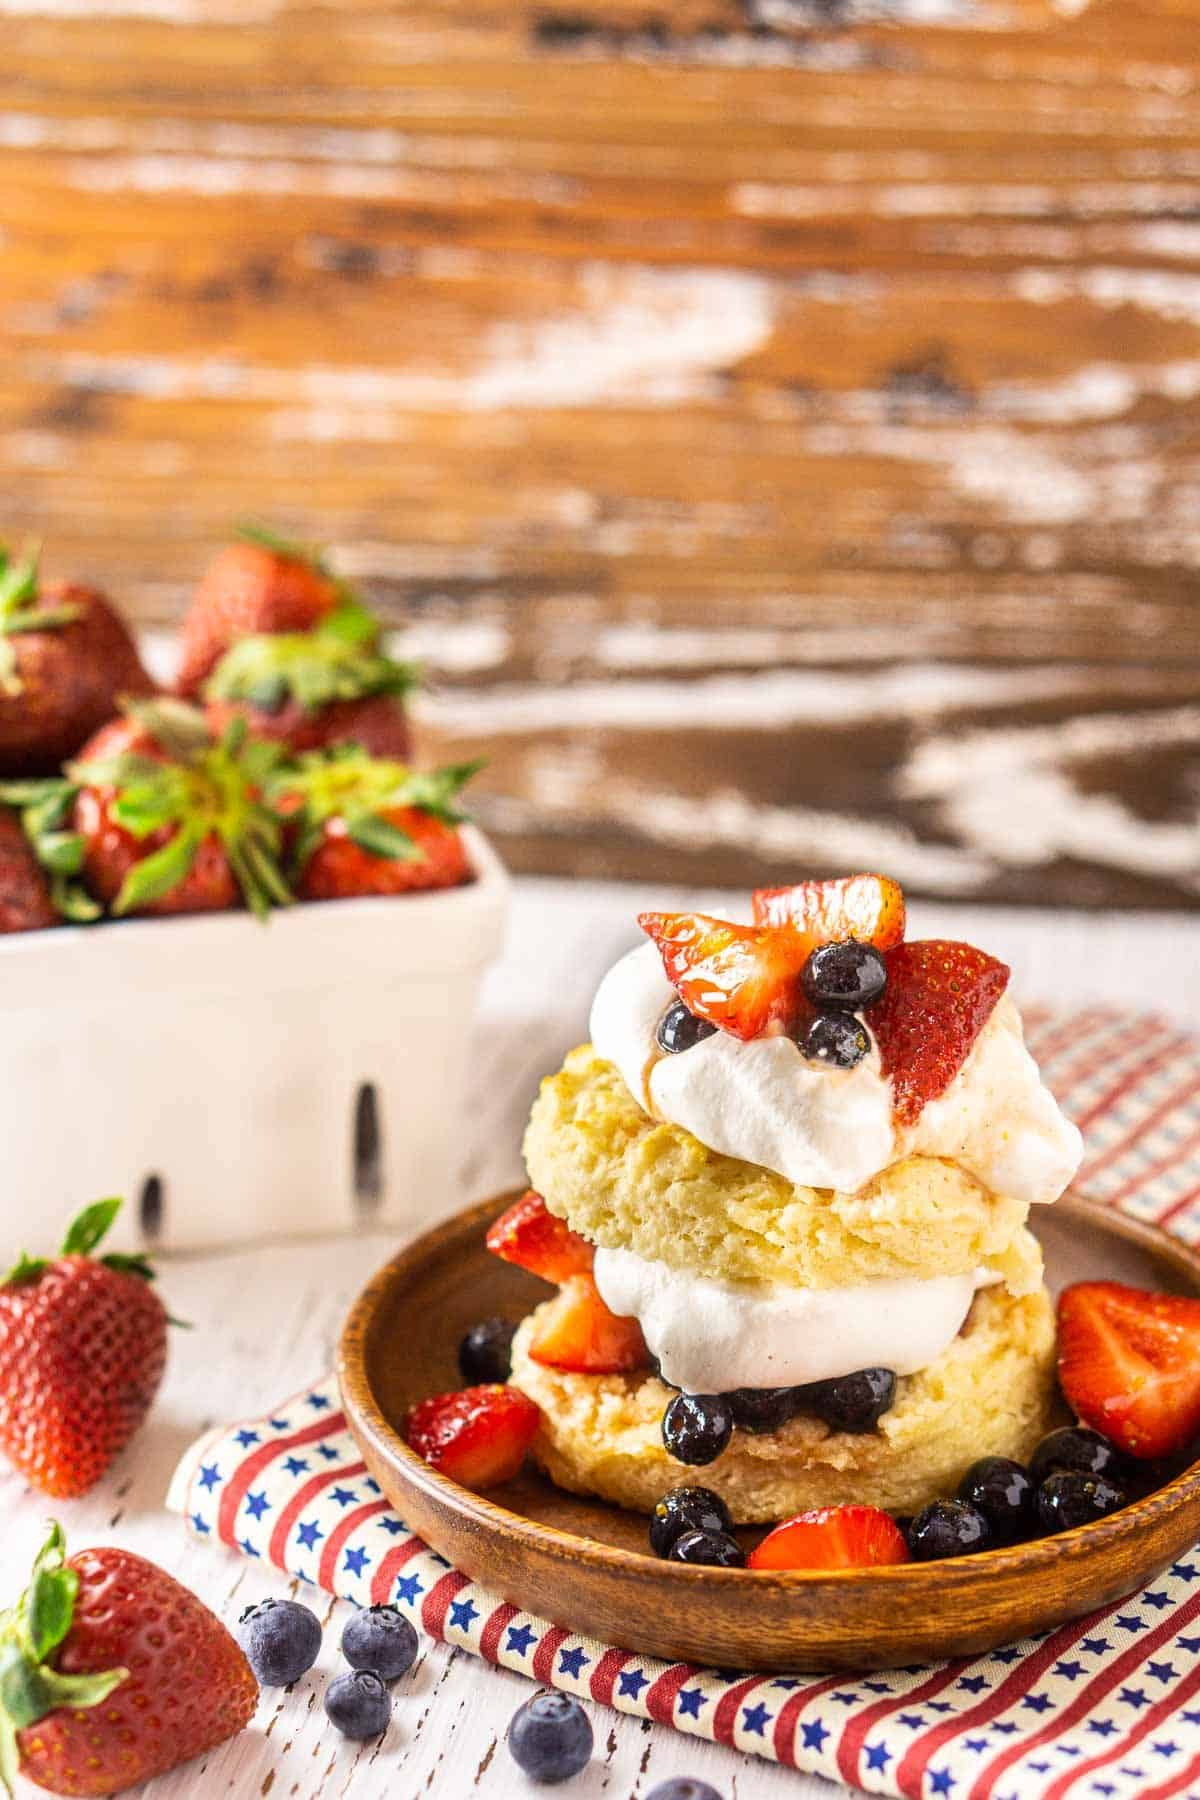 A blueberry-strawberry shortcake with strawberries behind it and blueberries to the side.